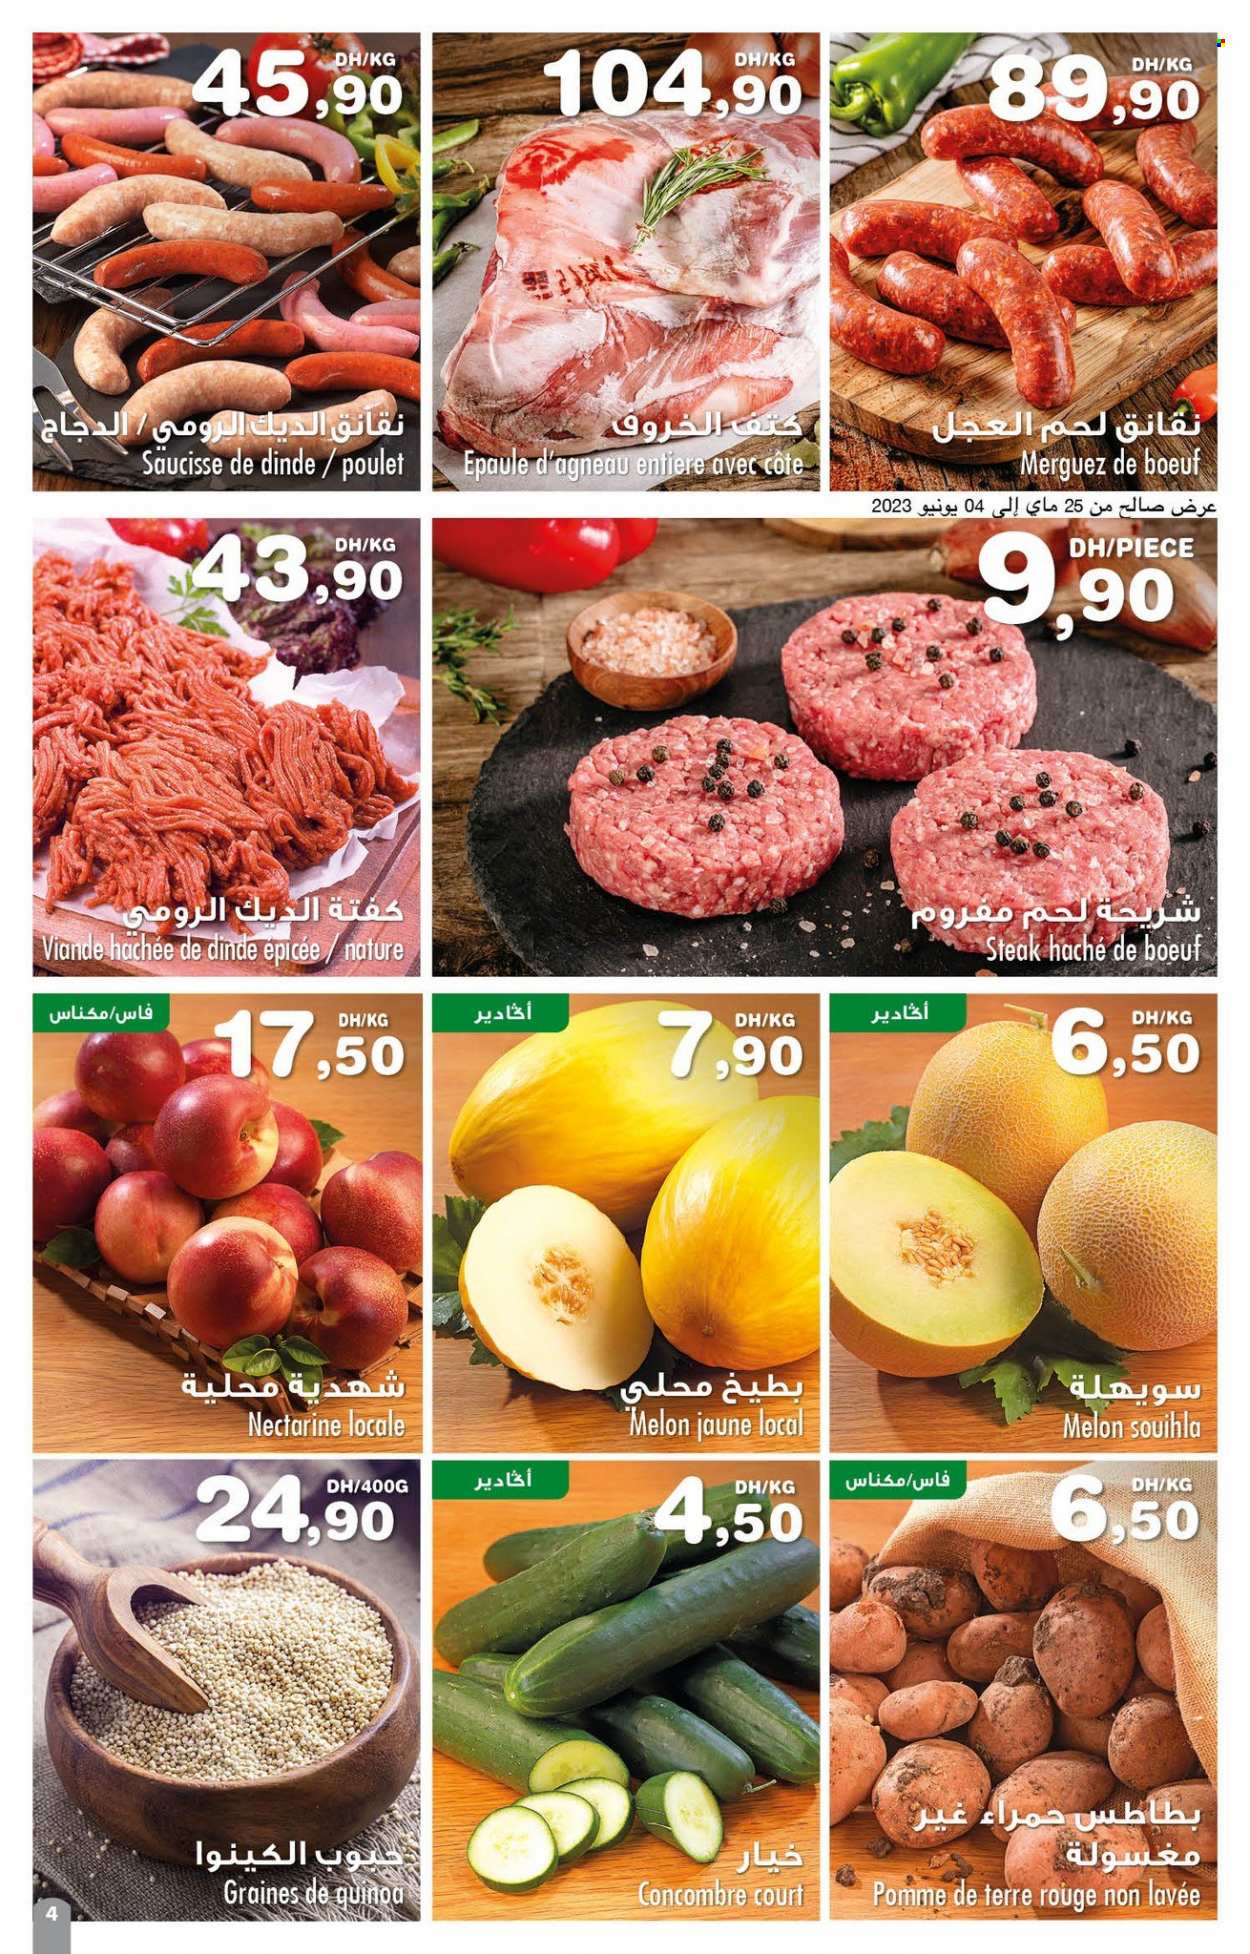 Catalogue Carrefour Express - 25/05/2023 - 14/06/2023. Page 7.